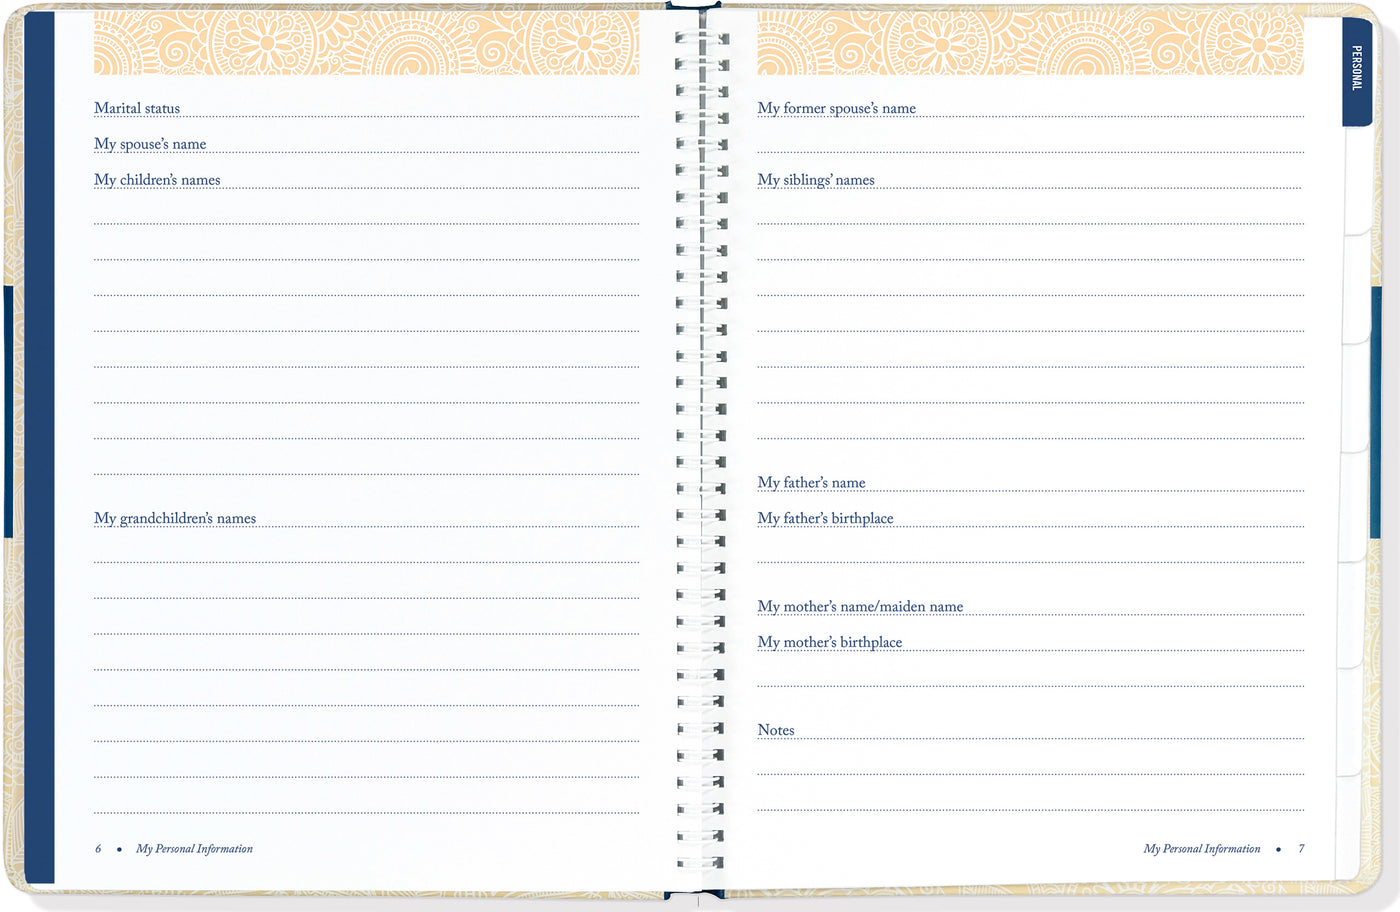 PEACE OF MIND PLANNER | Atlas Stationers.